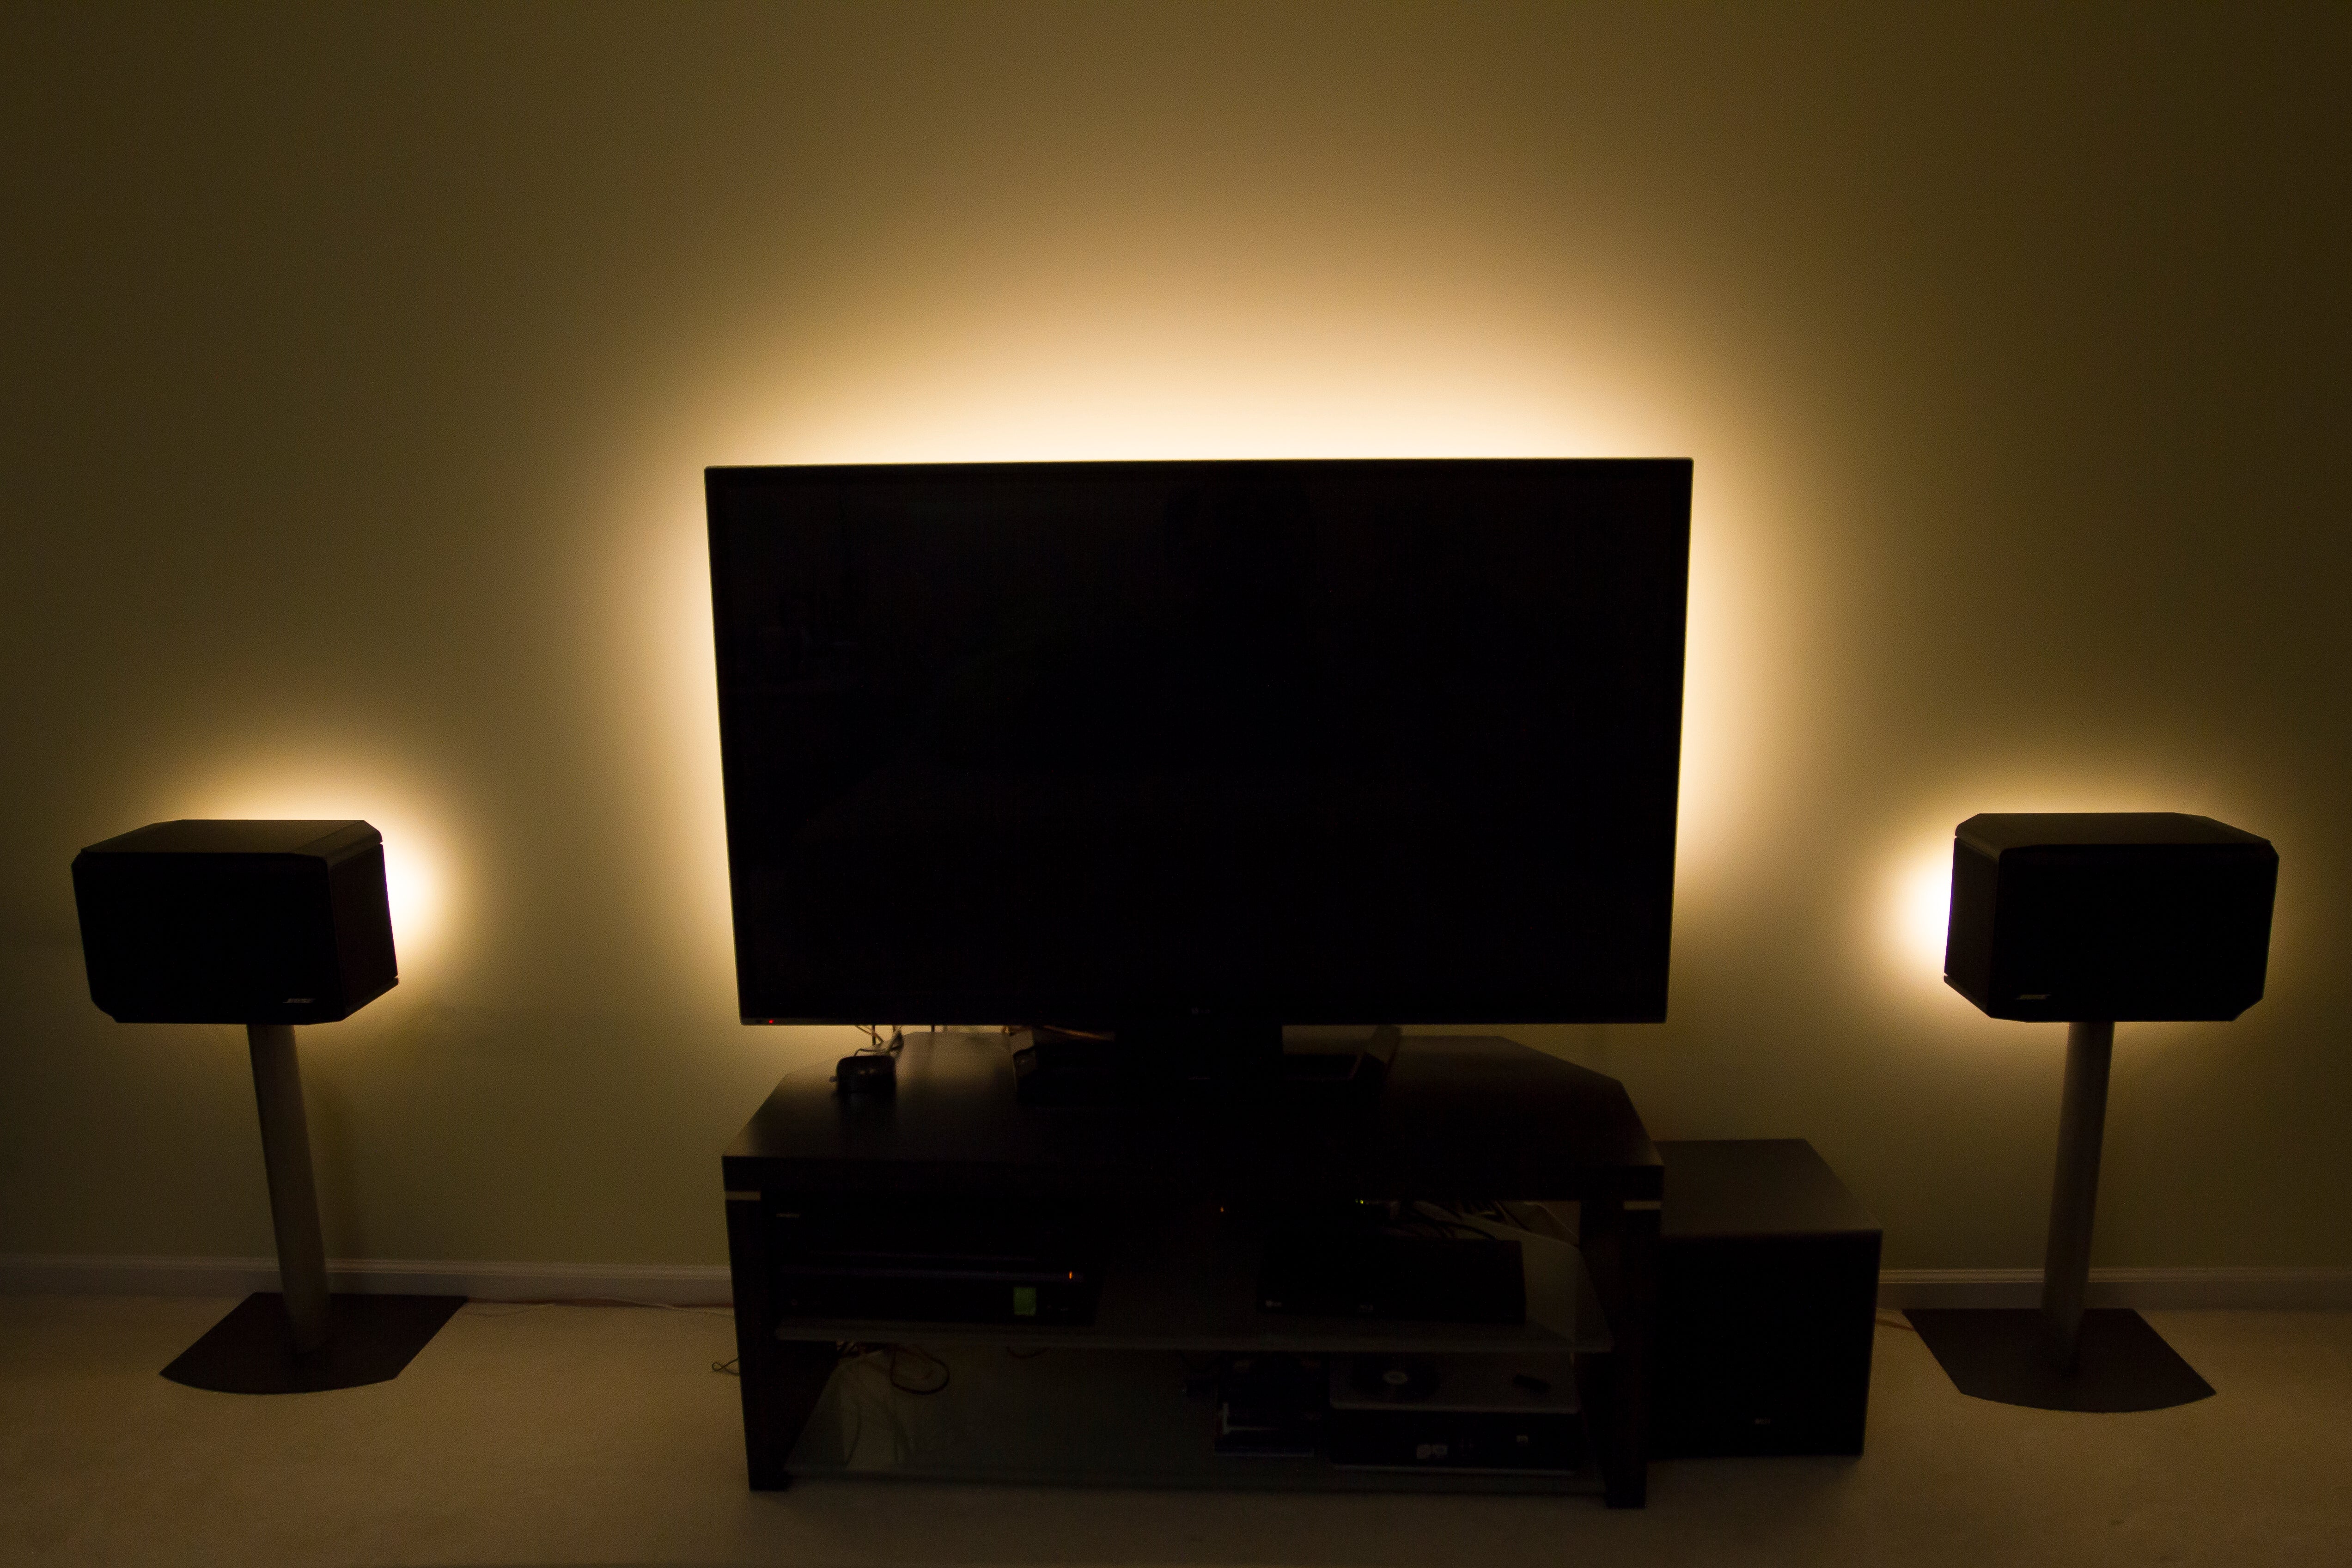 tv ambient backlight, tv ambient backlight Suppliers and